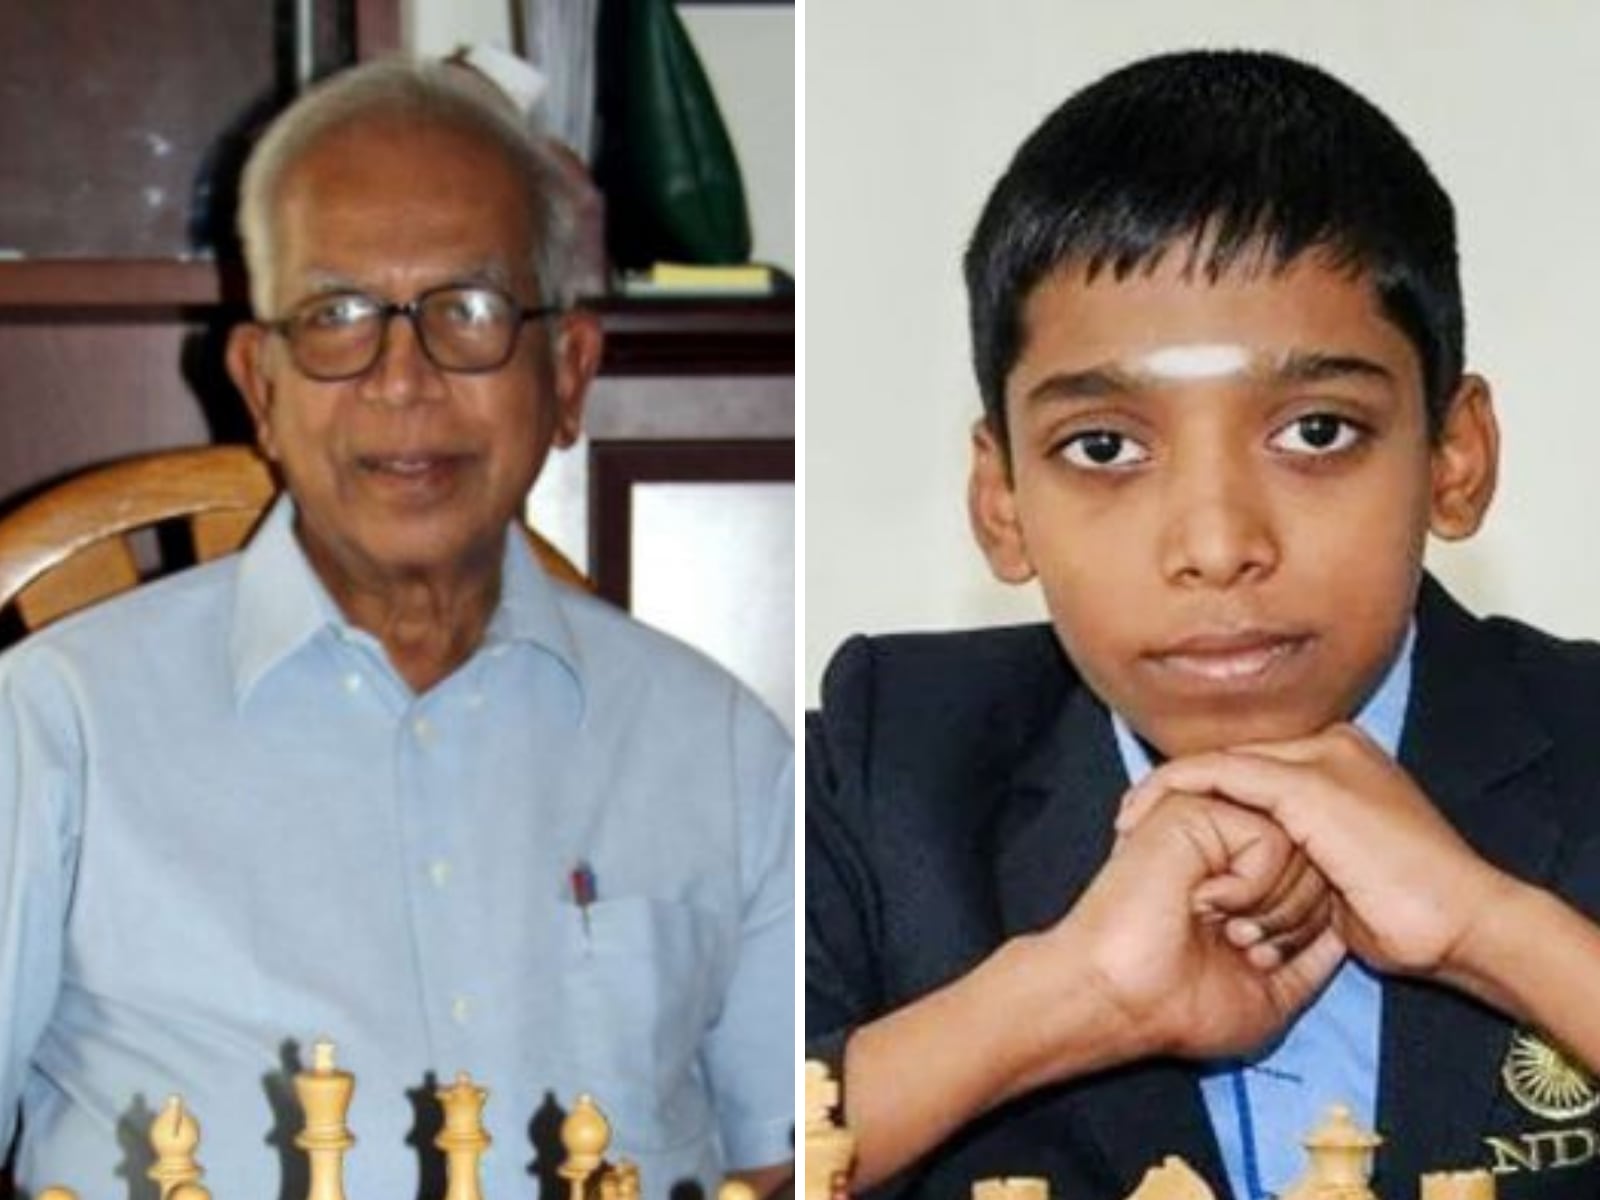 ChessBase India on X: When it comes to chess in Bihar, we do not have a  titled player yet from the state. However, things are changing rapidly and  one player who has